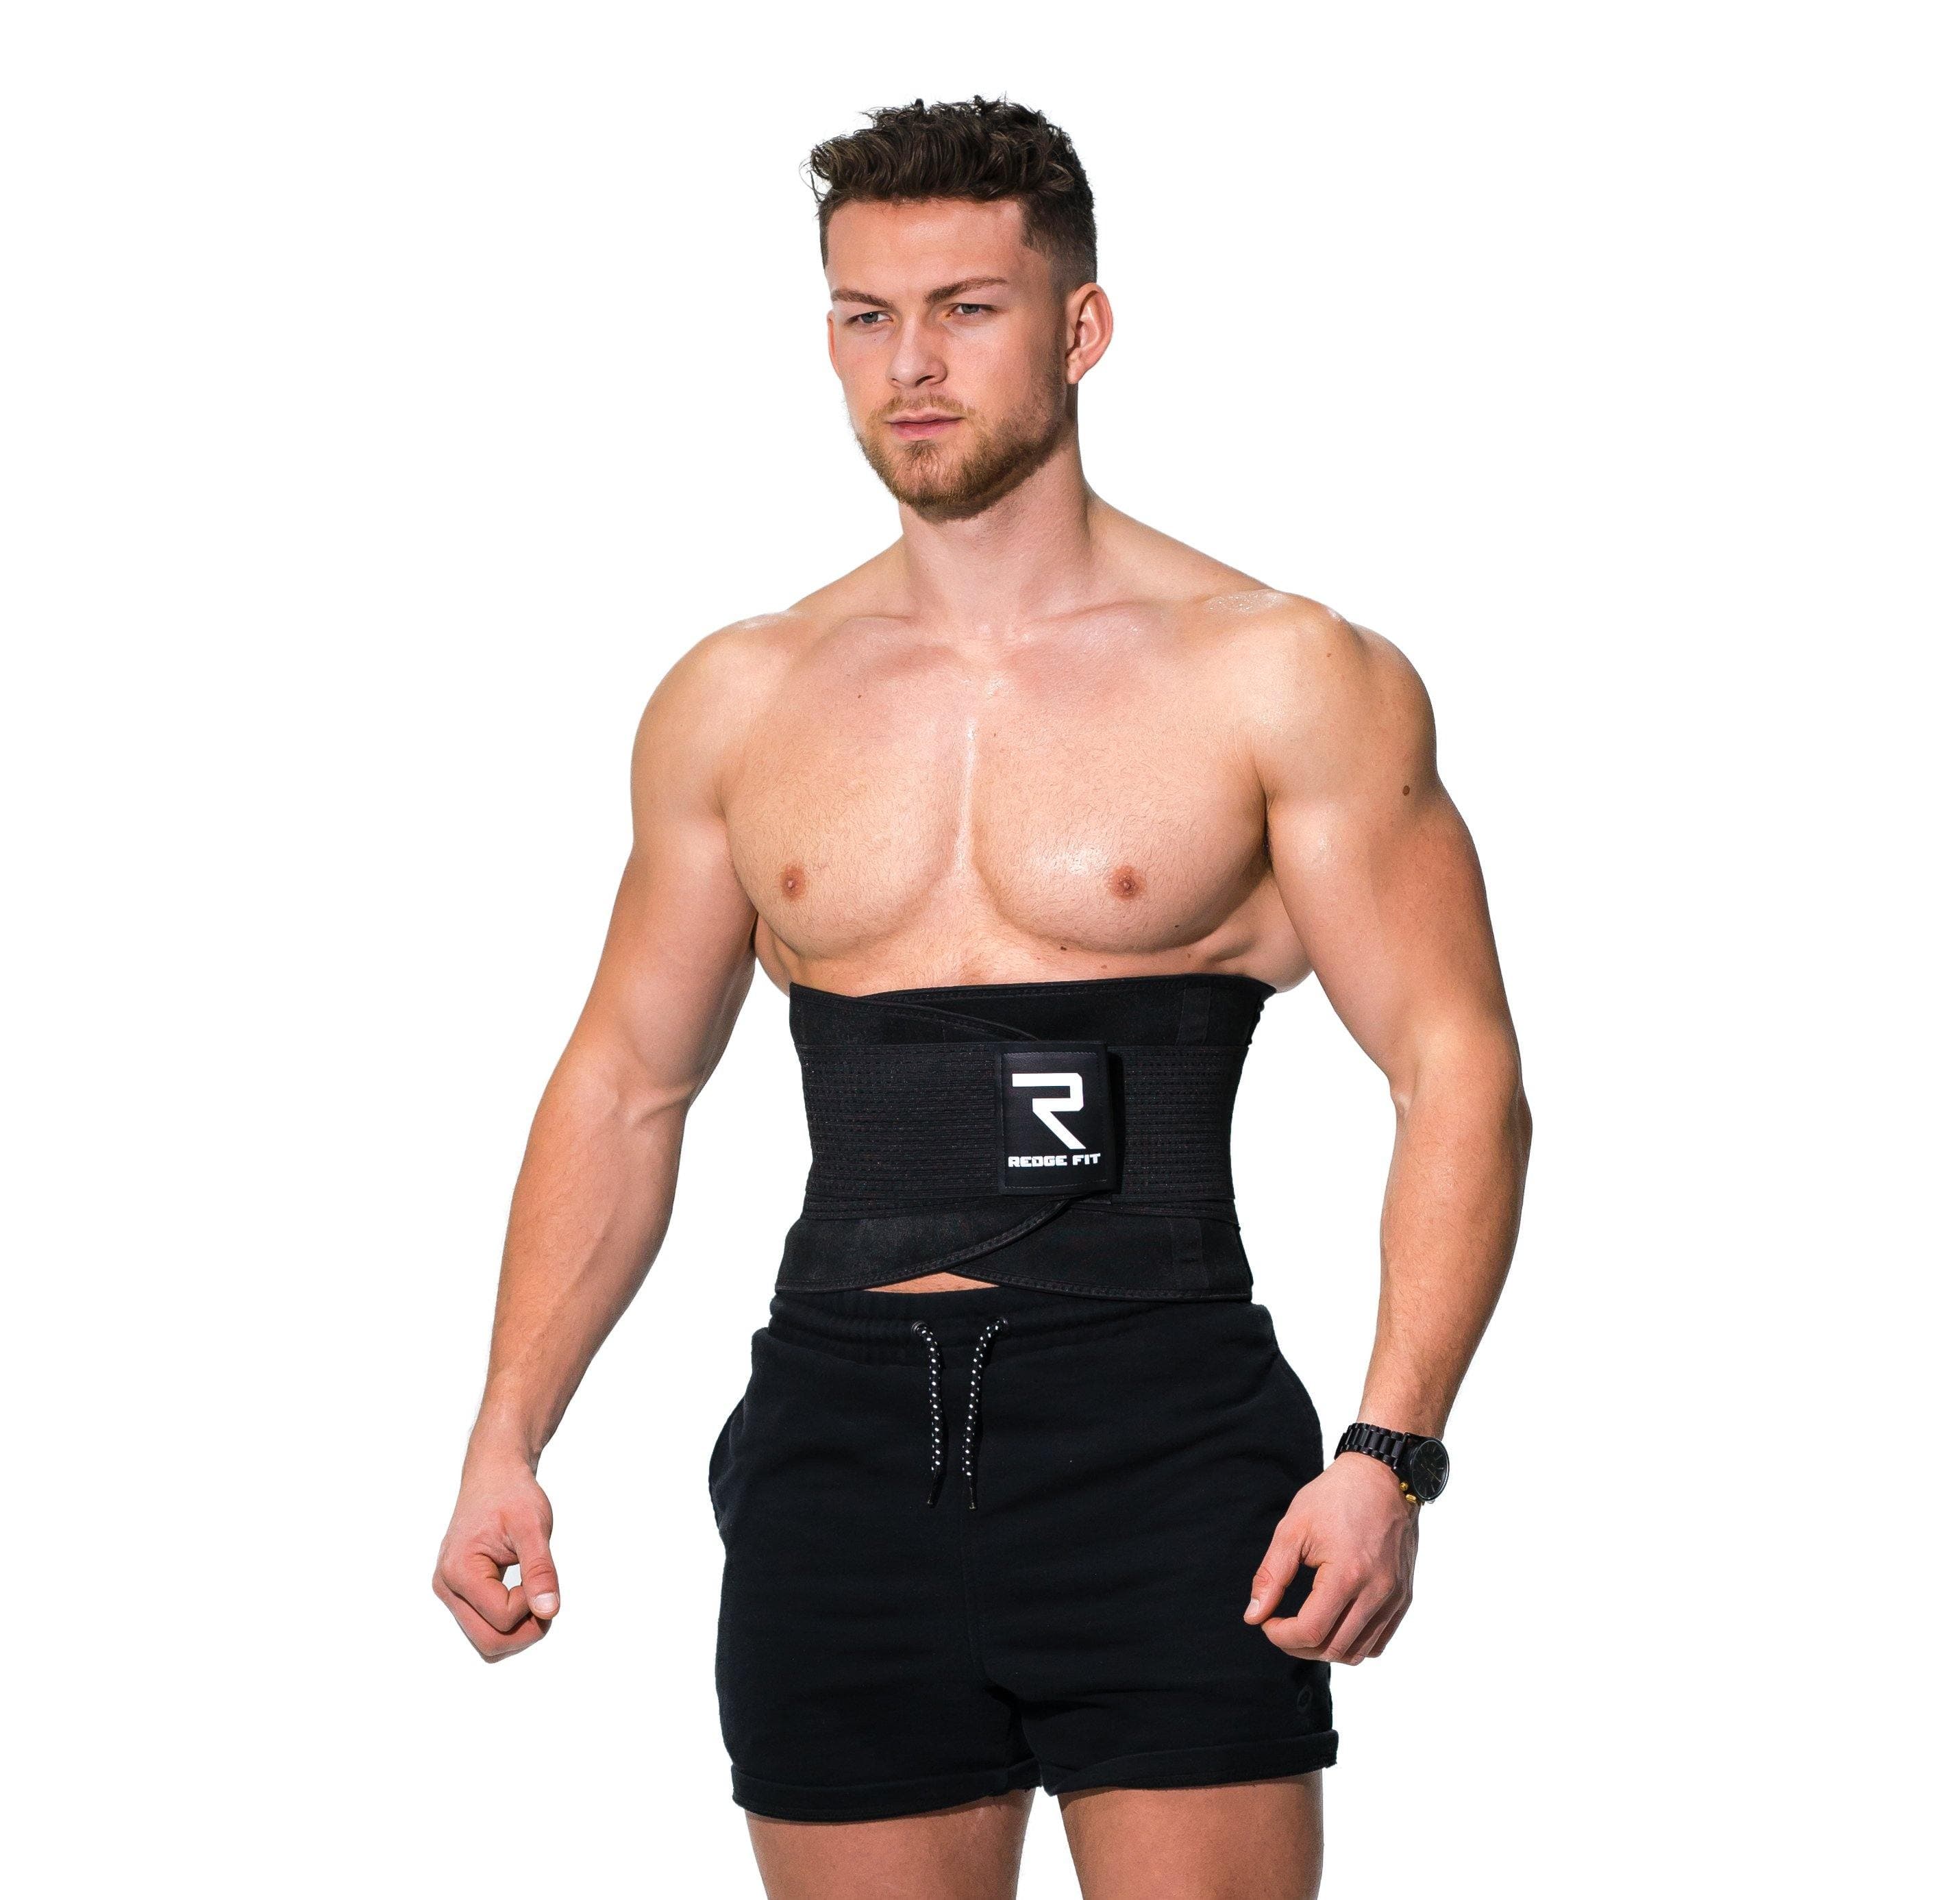 Man modeling the Redge Fit Home Gym Intermediate Pack Sweat Belt Available at https://www.getredge.com/products/home-gym-intermediate-pack